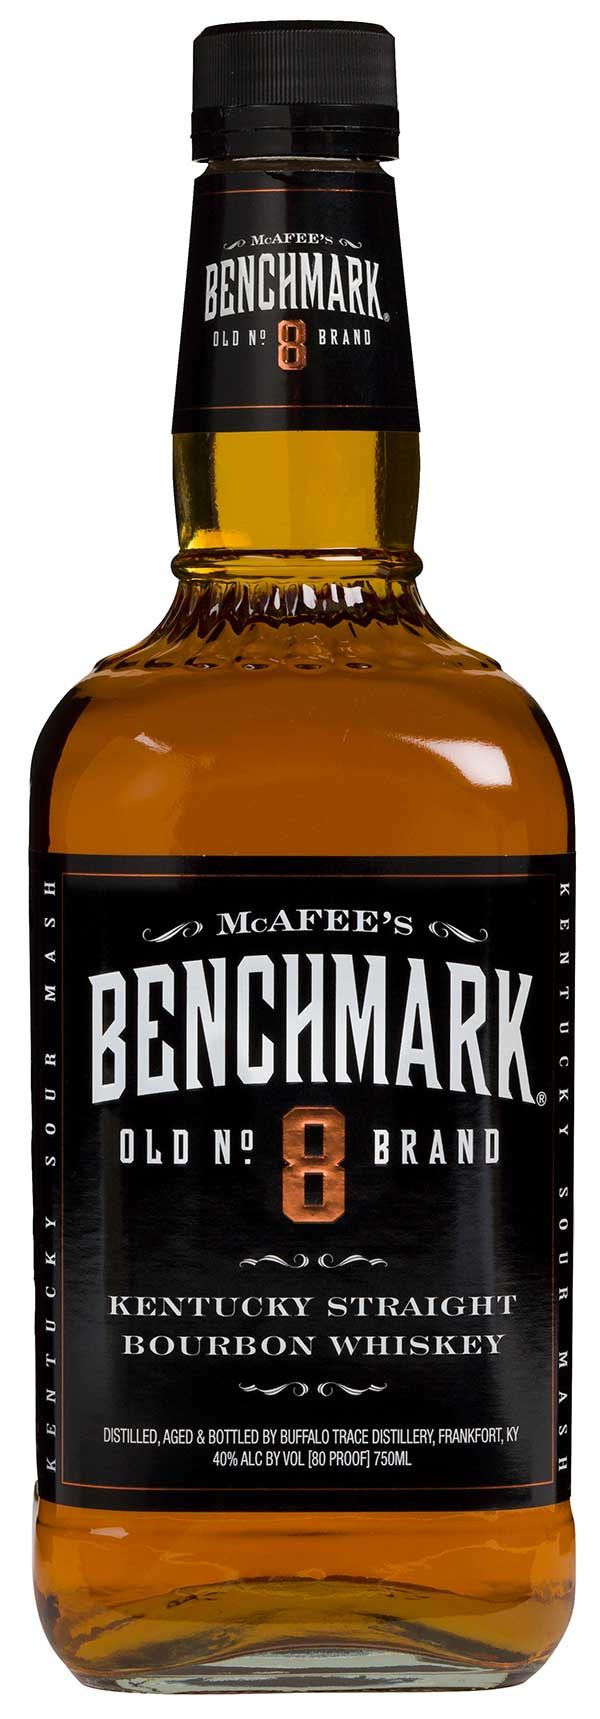 Zoom to enlarge the Mcafee’s Benchmark Old No. 8 Brand Kentucky Straight Bourbon Whiskey